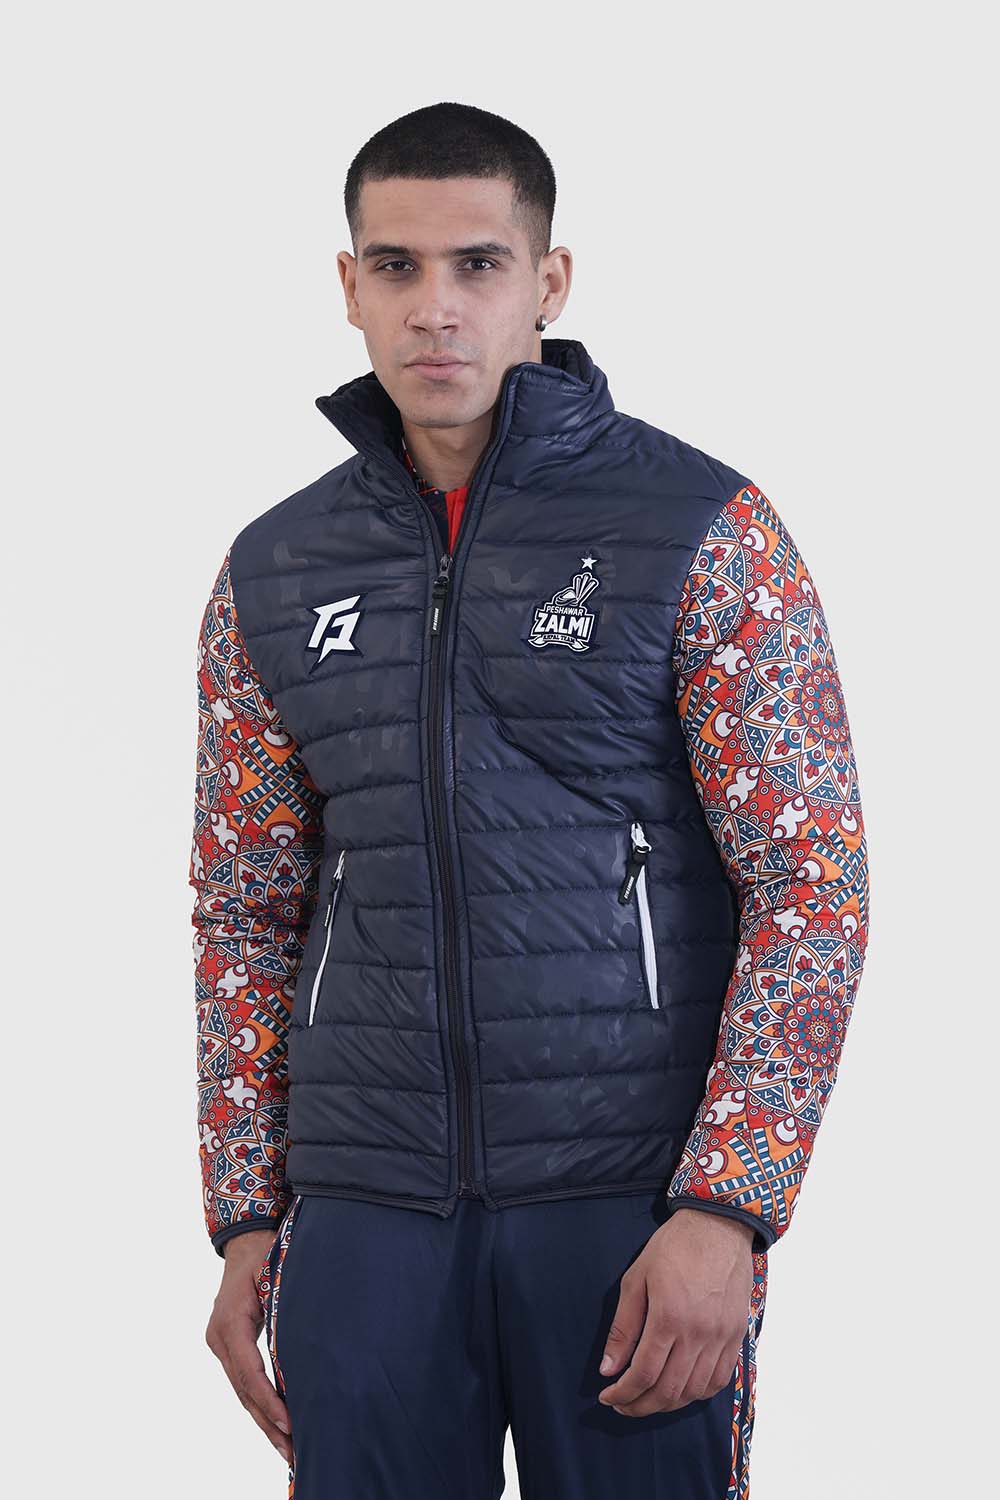 Zalmi Training Puffer Jacket – Conquer the Cold in Style | Zalmi Offical Store